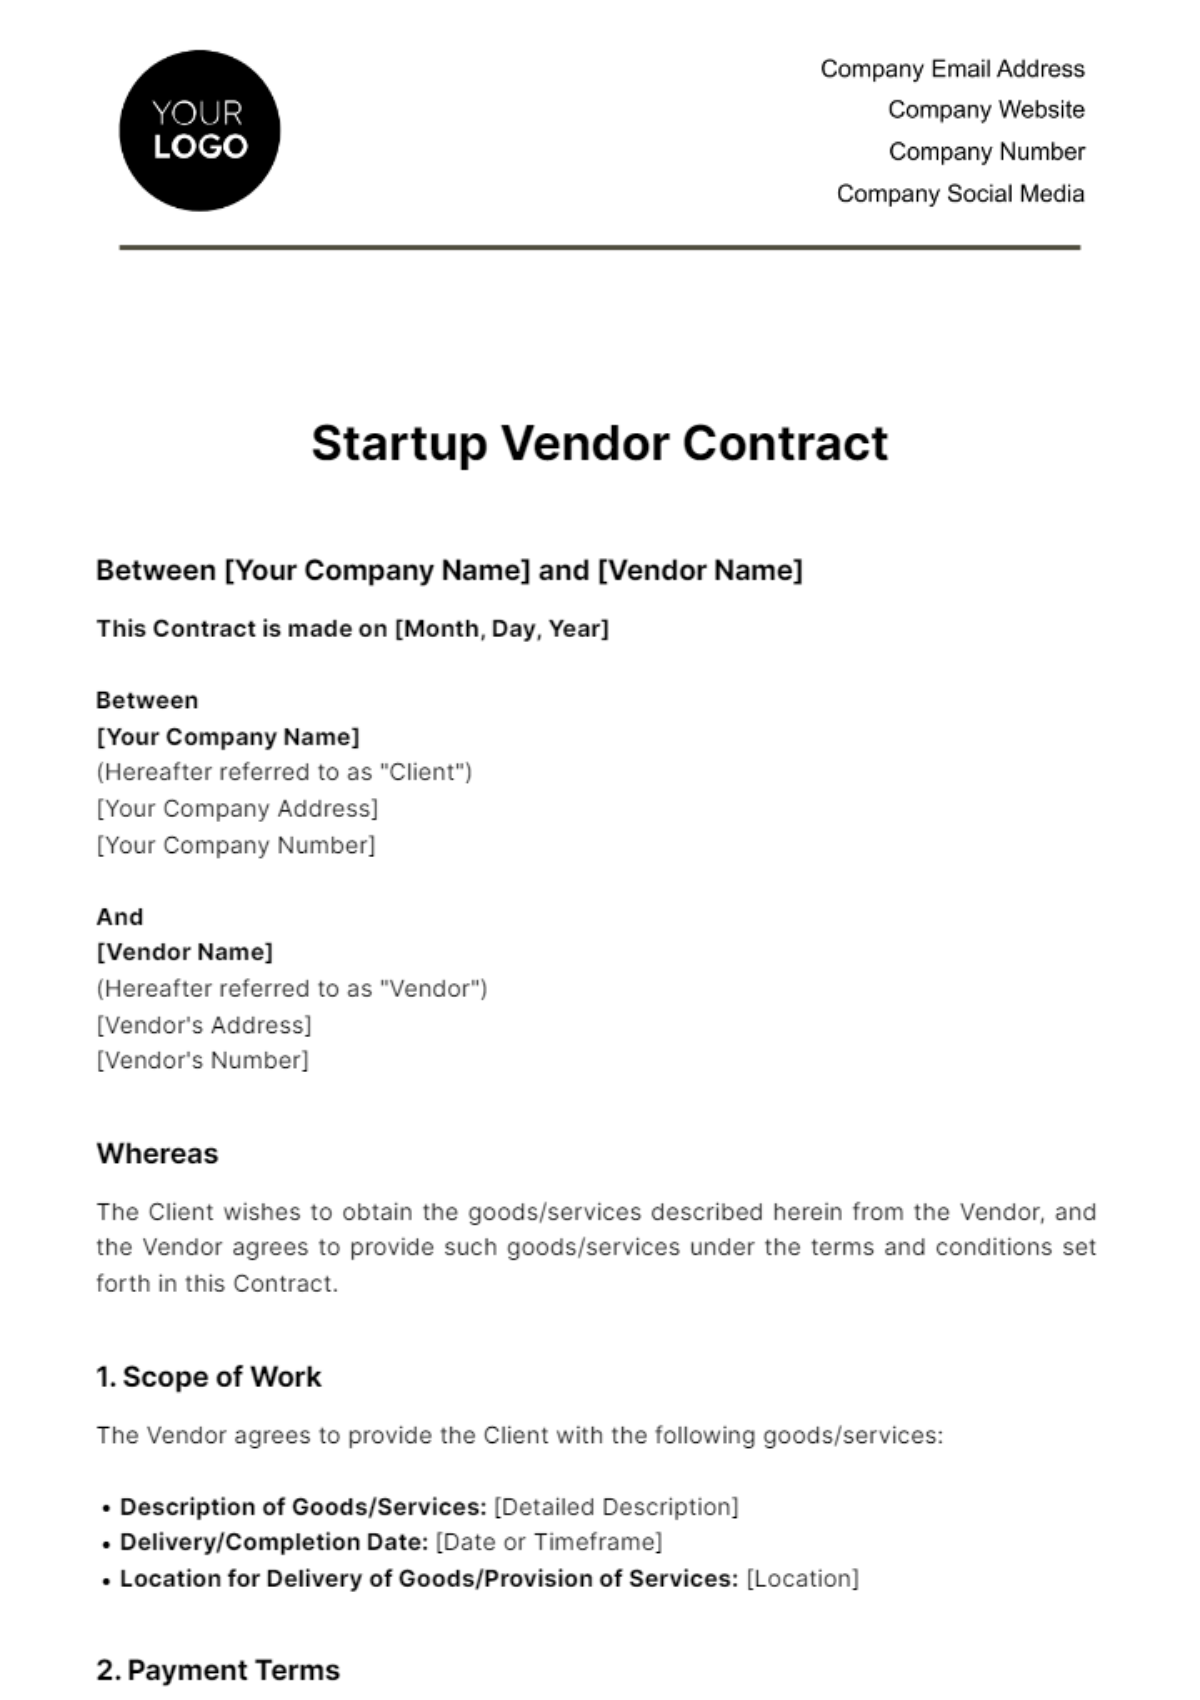 Free Startup Vendor Contract Template